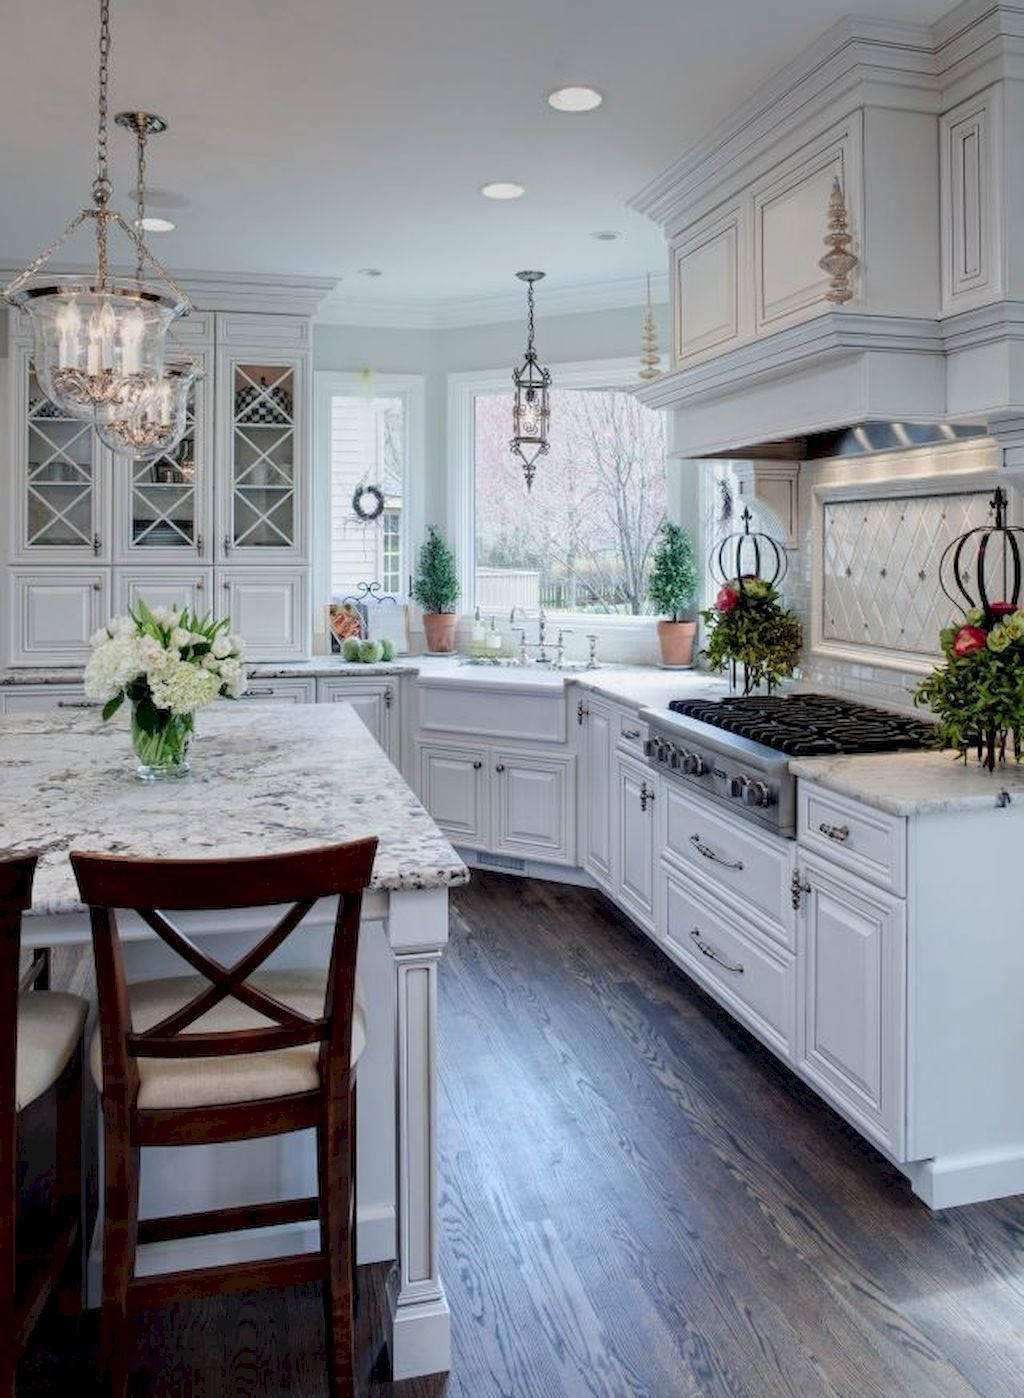 Superb Kitchen Design Ideas That You Can Try 38